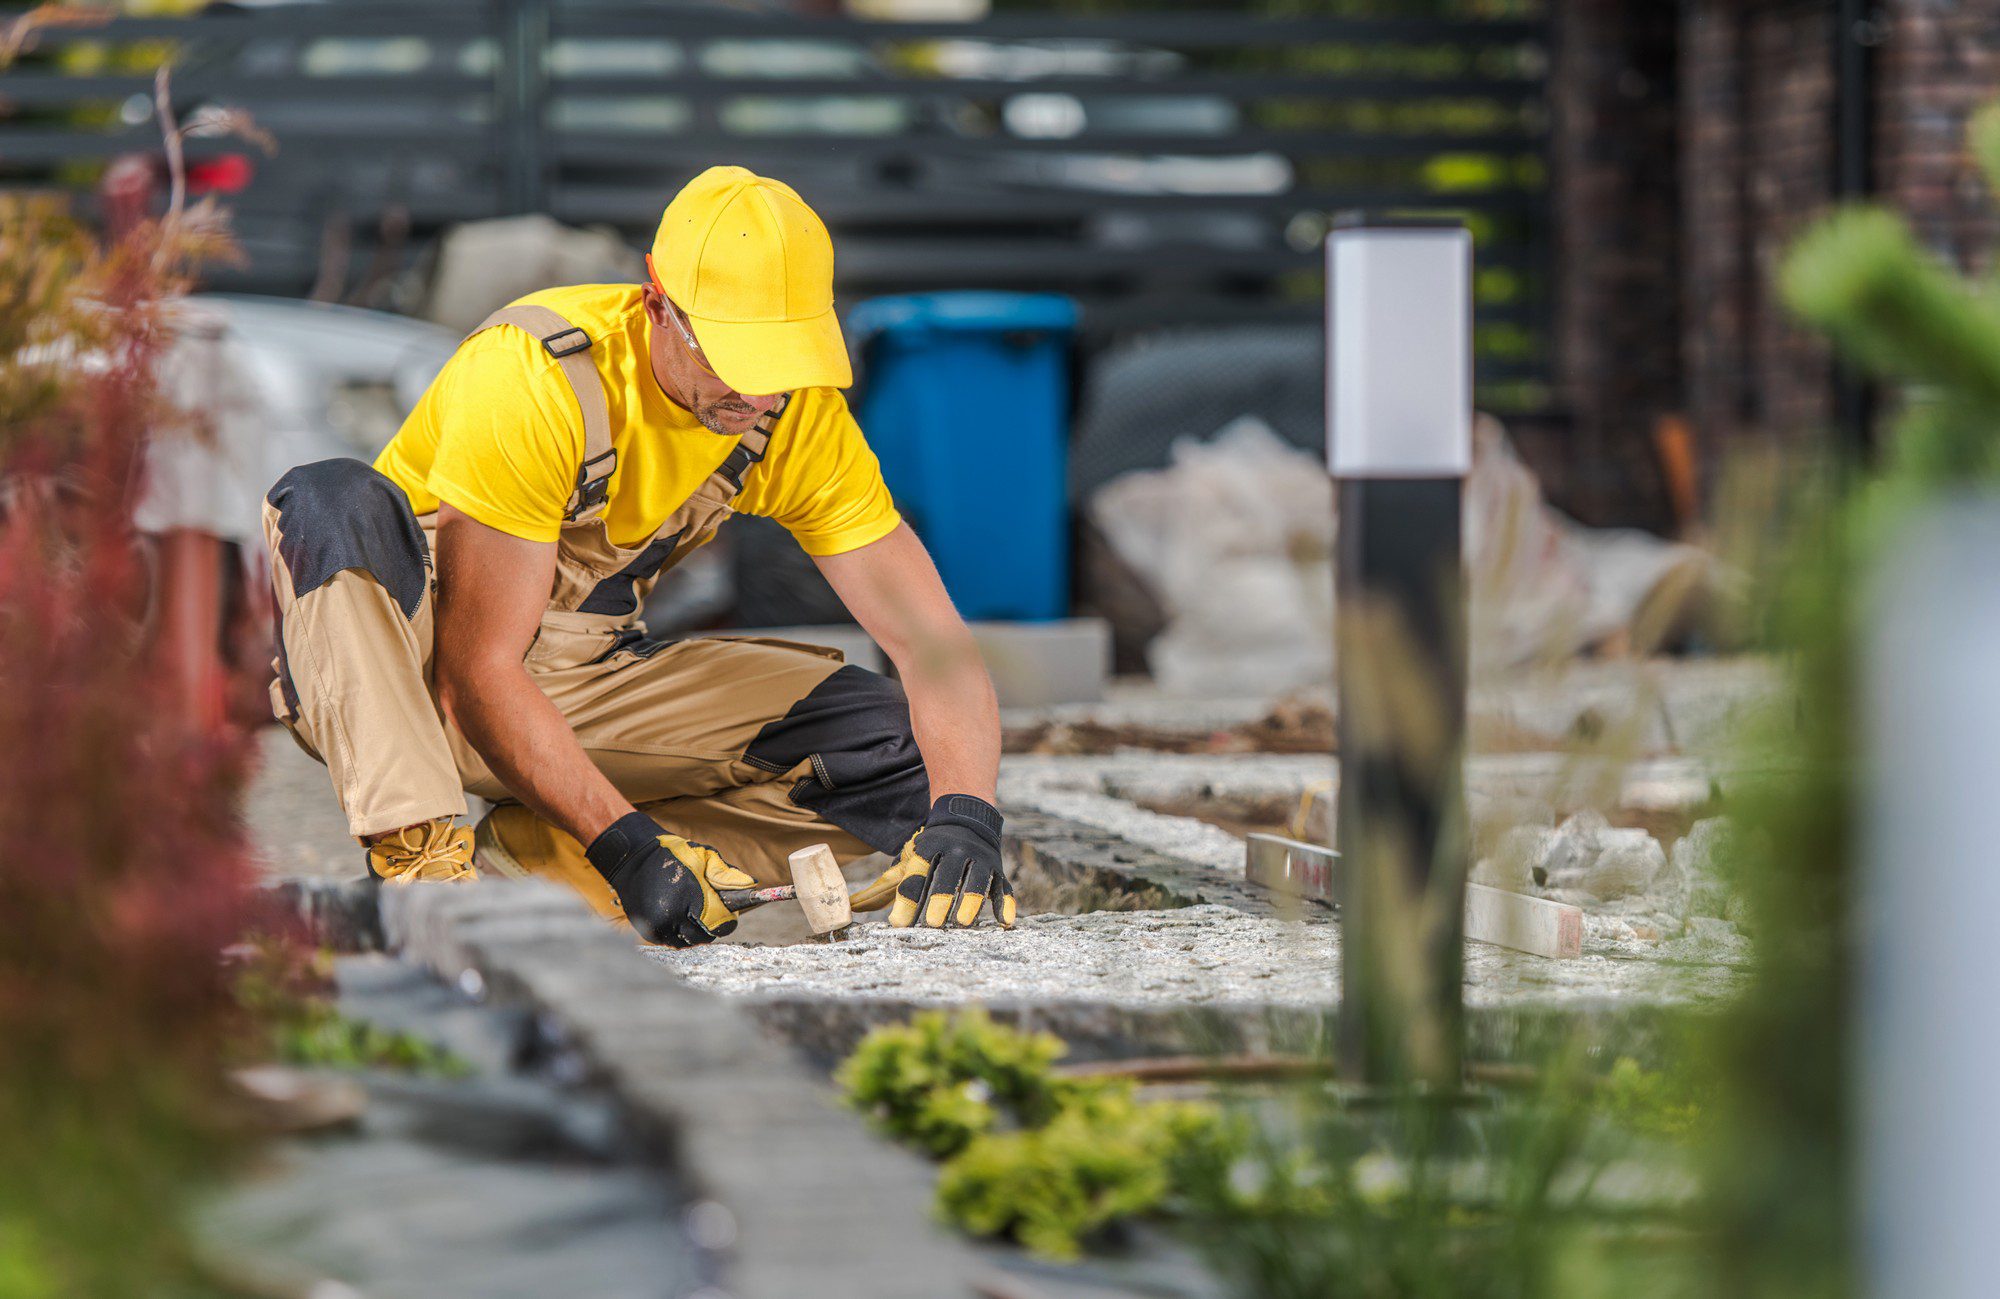 The image shows a construction worker engaged in laying paving stones or bricks. The worker is wearing a yellow shirt, a yellow hard hat, and work gloves, indicative of the safety measures typically taken on construction sites. The worker seems to be focused on setting or adjusting the stones on a gravel base. There are additional construction materials scattered around the site. The background is blurred, emphasizing the action in the foreground, but includes elements that suggest this is an outdoor setting with some greenery, possibly indicating the landscaping aspect of the work.